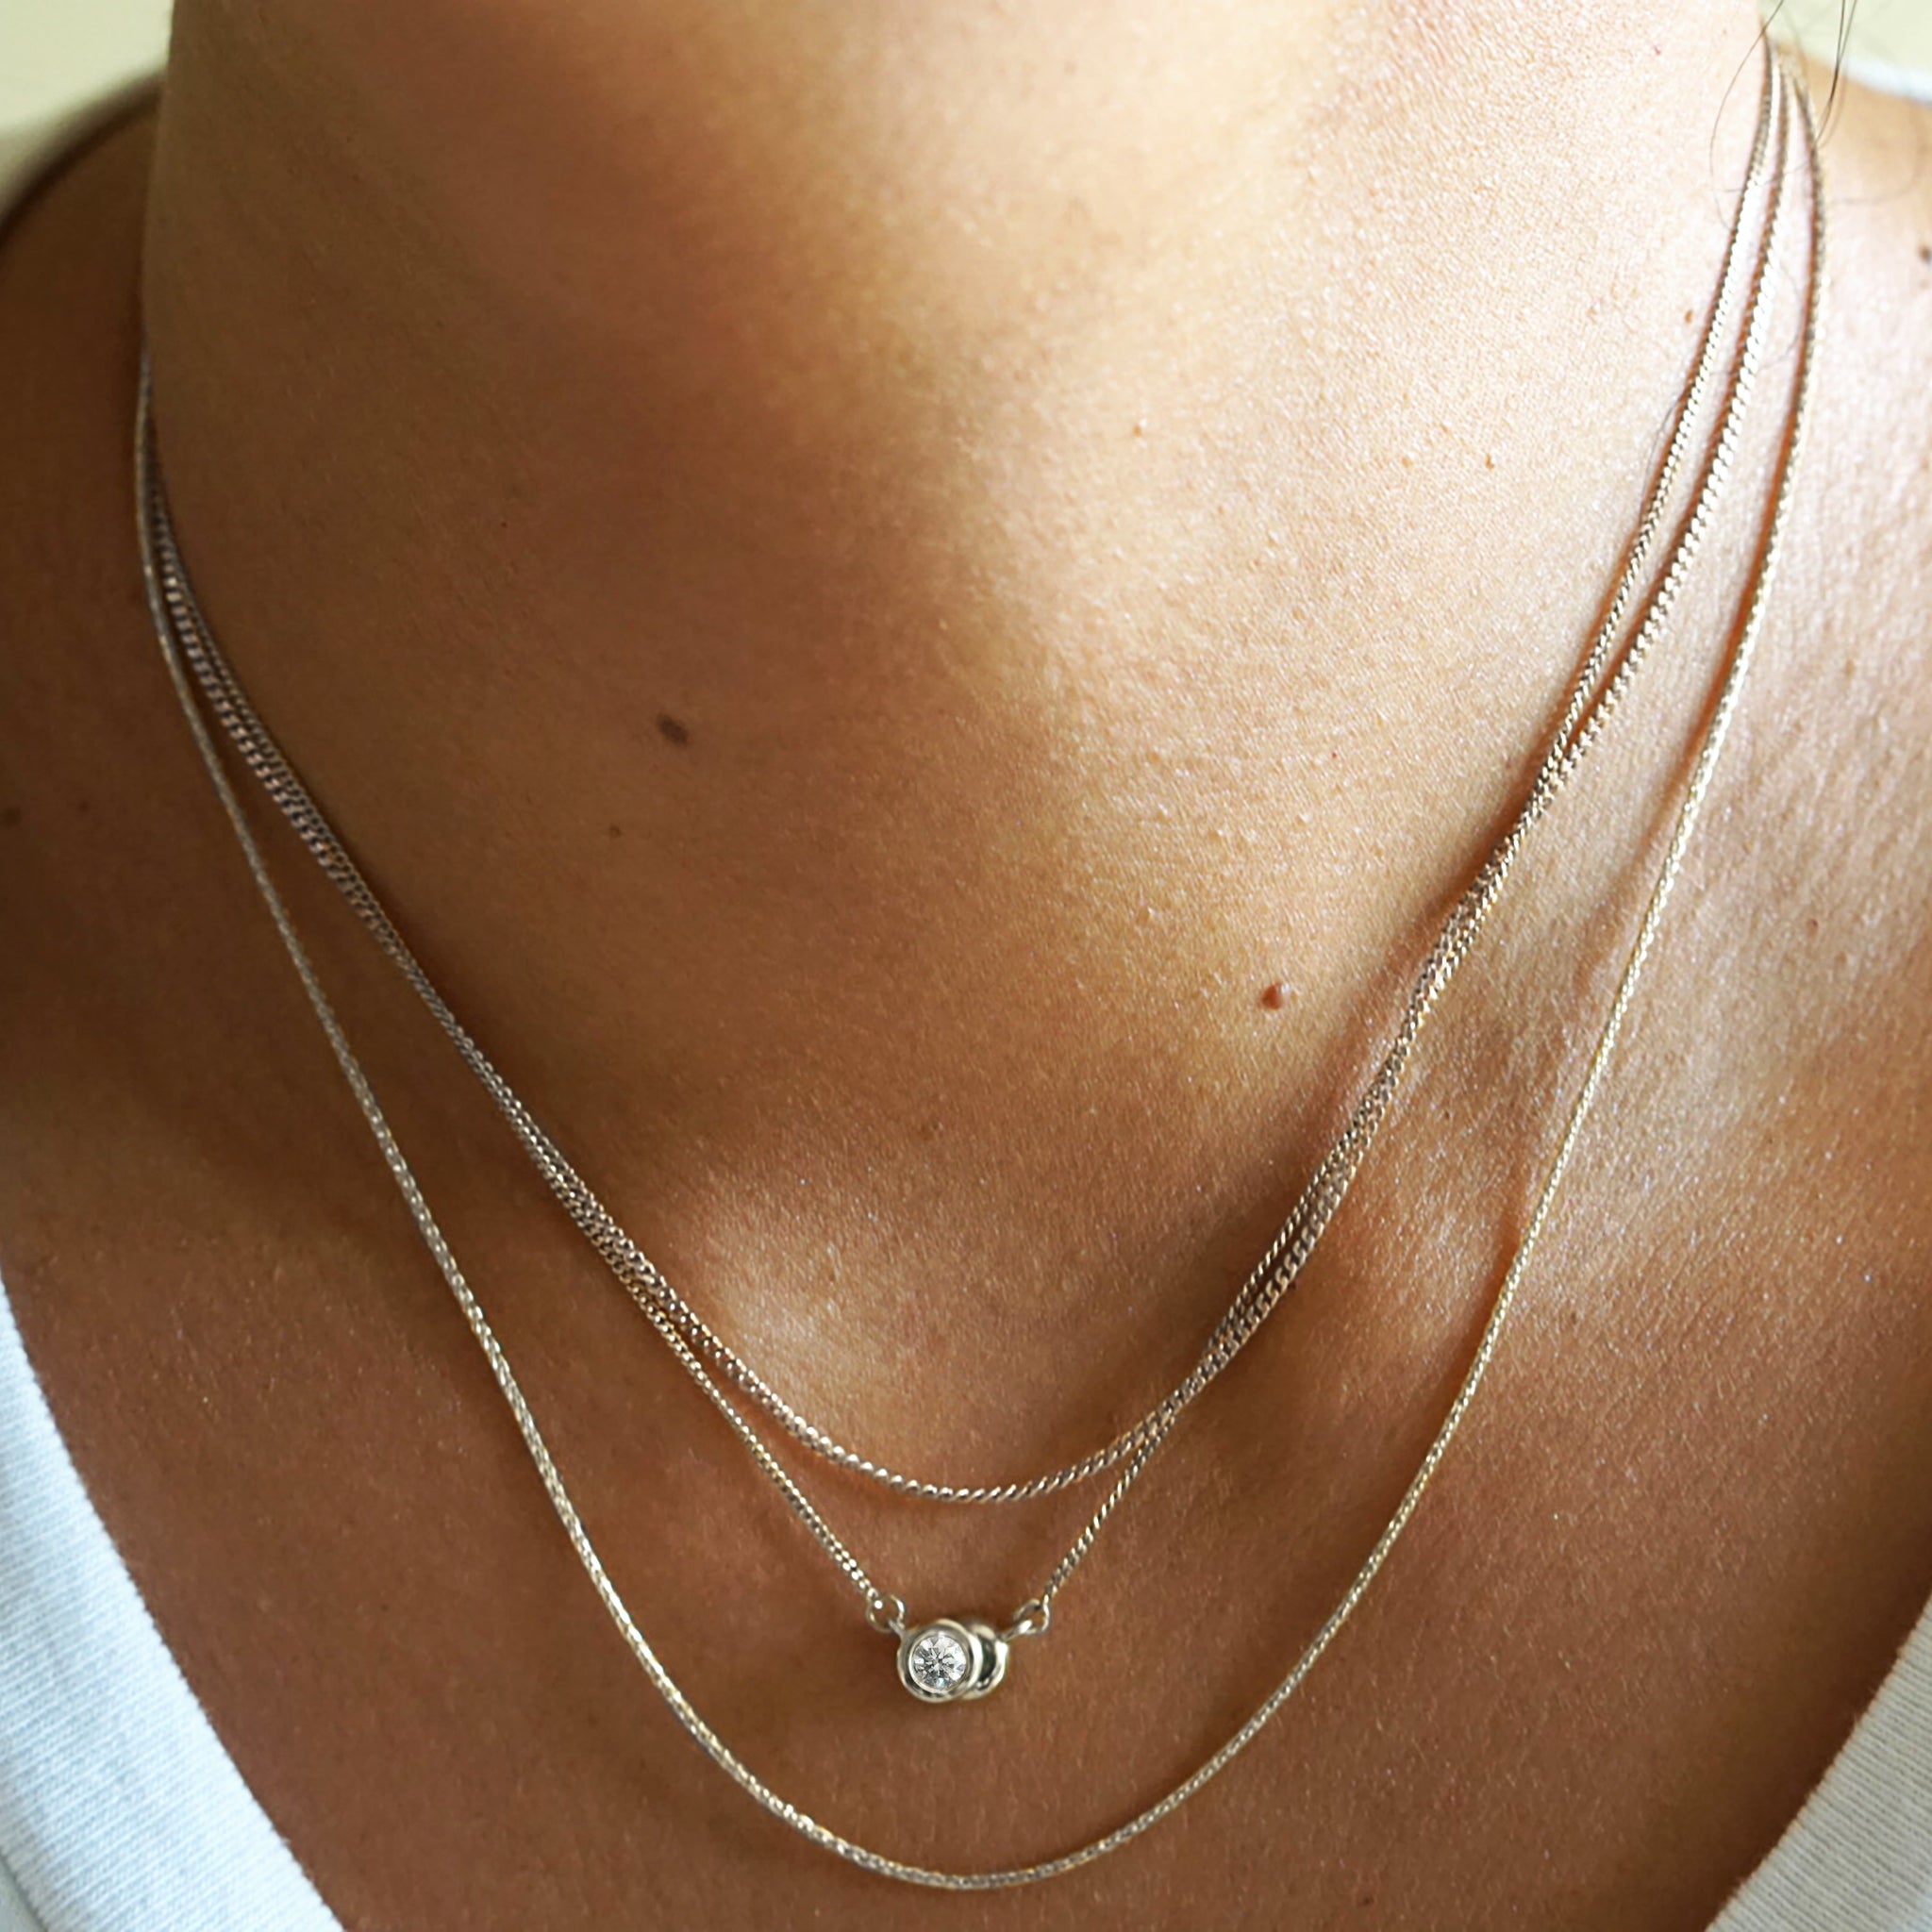 Layered white gold necklaces by AïANA